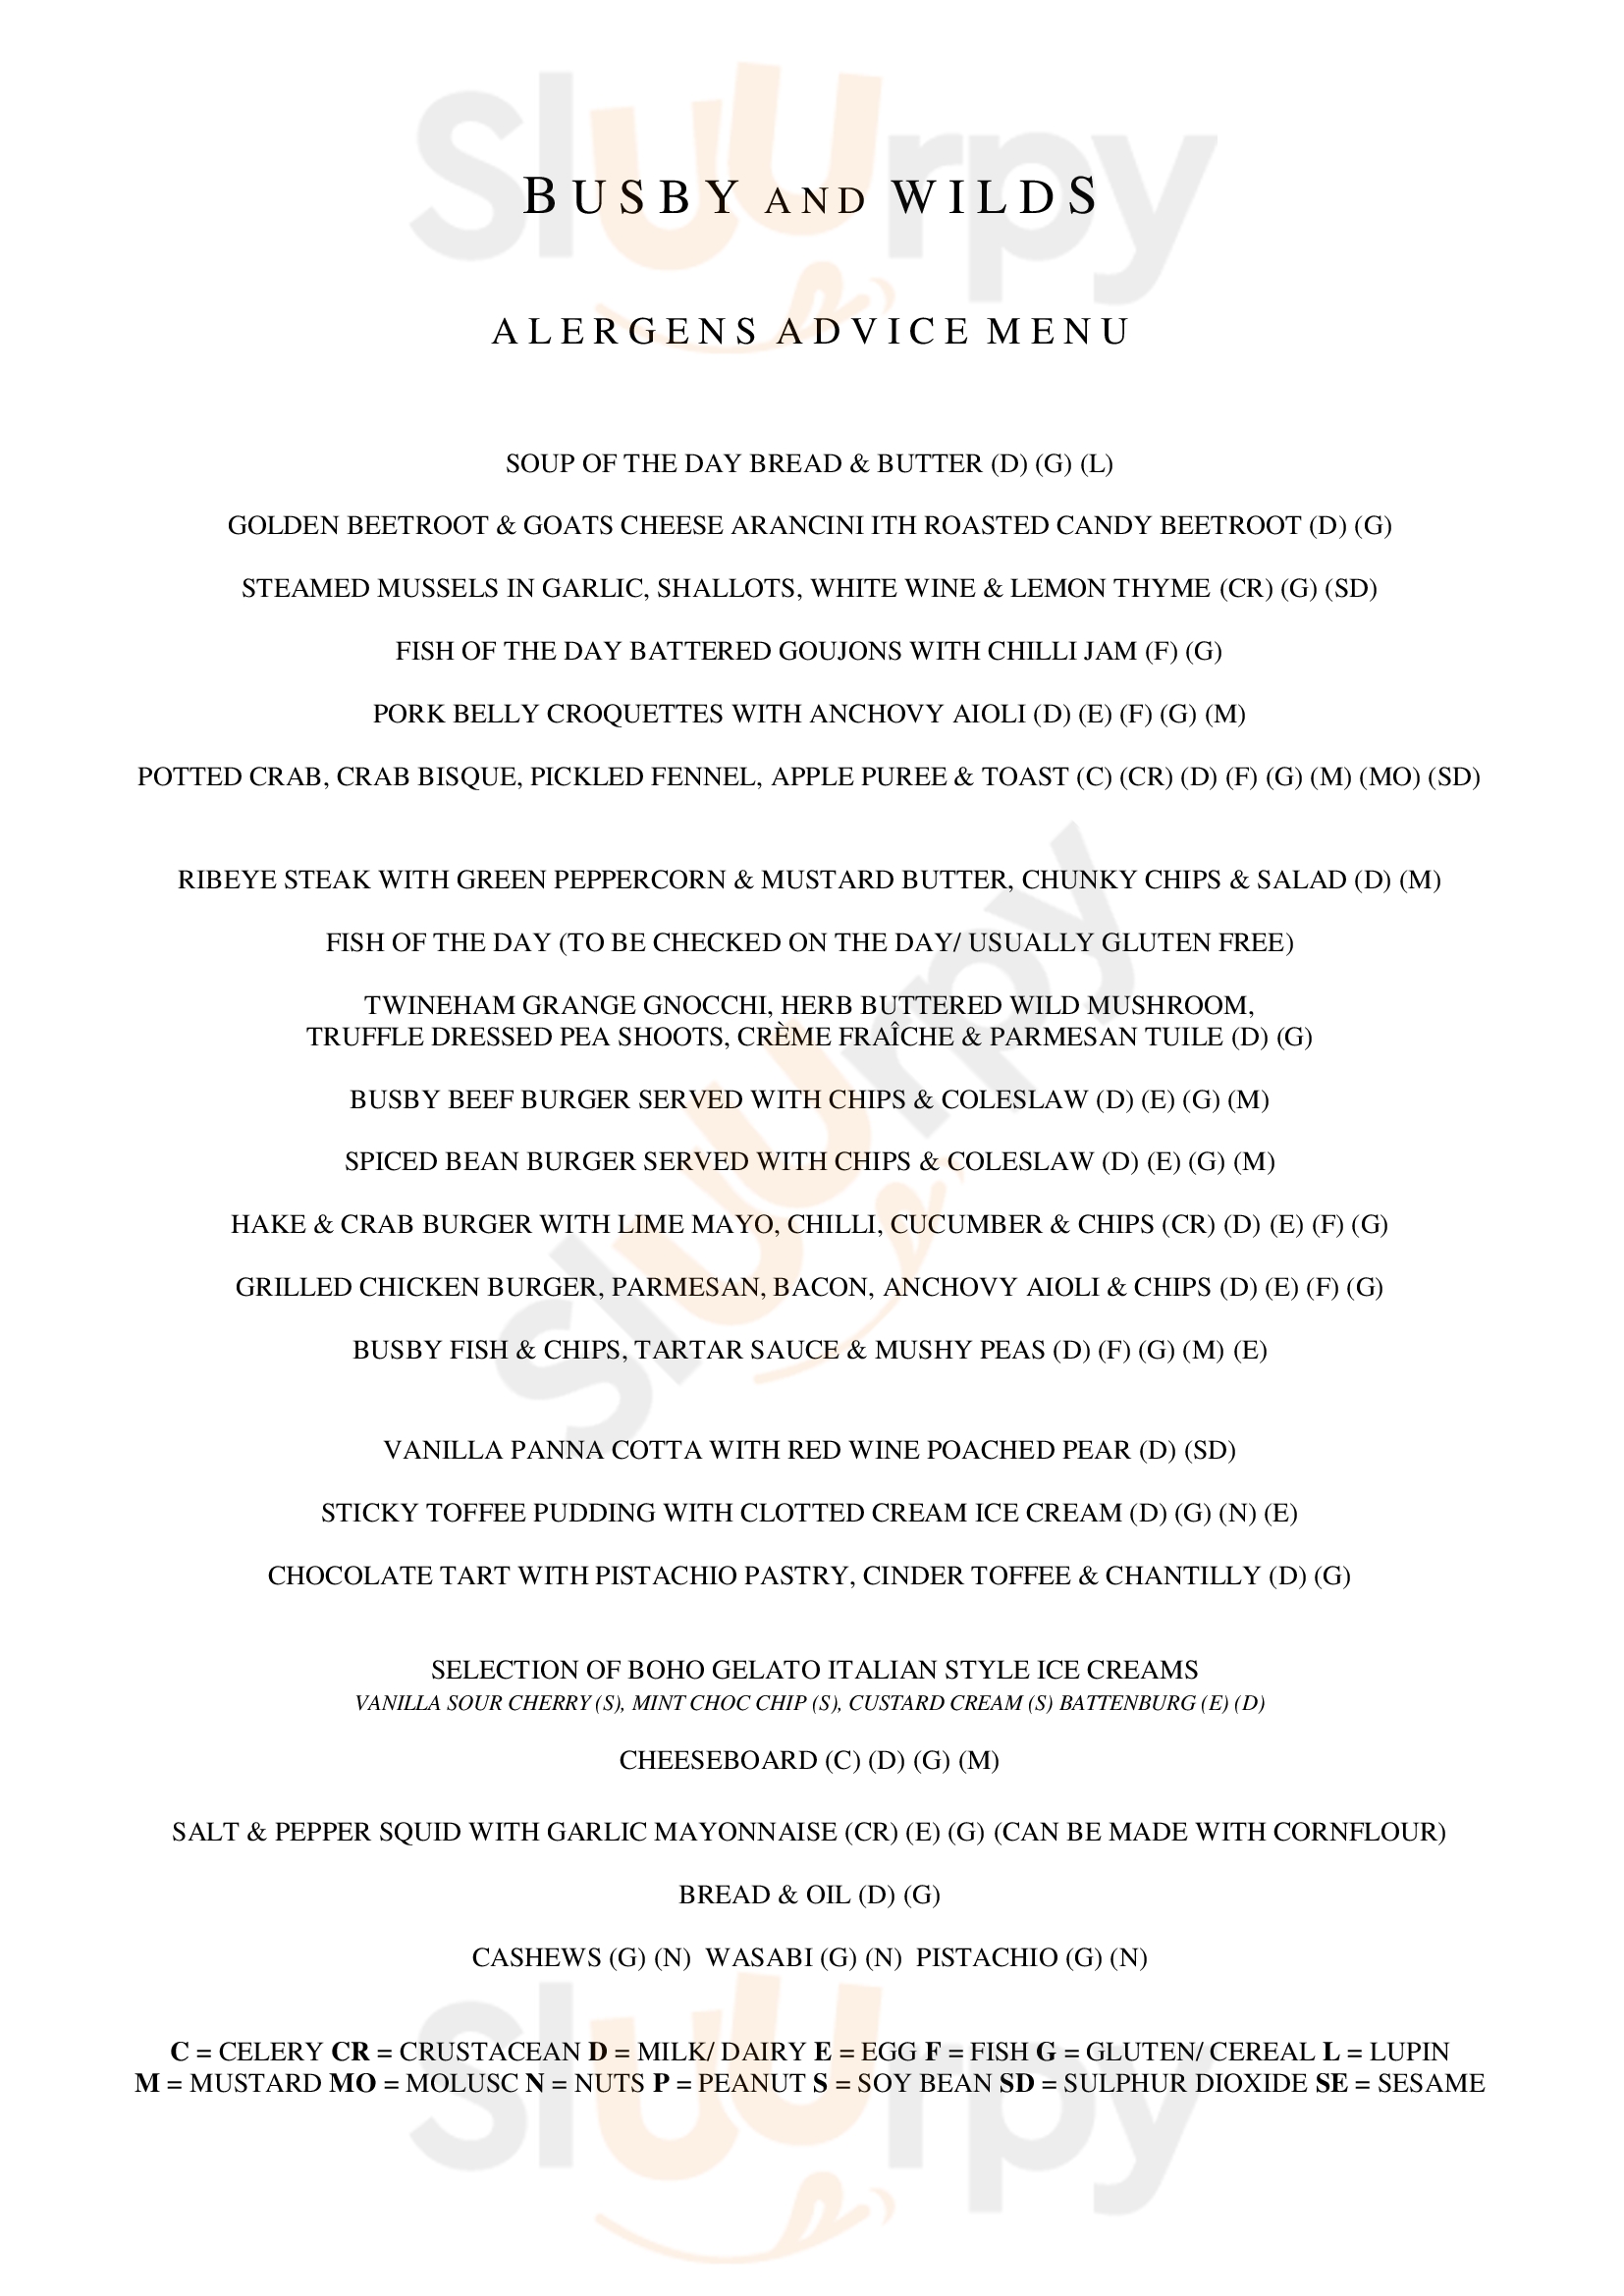 Busby And Wilds Brighton Menu - 1